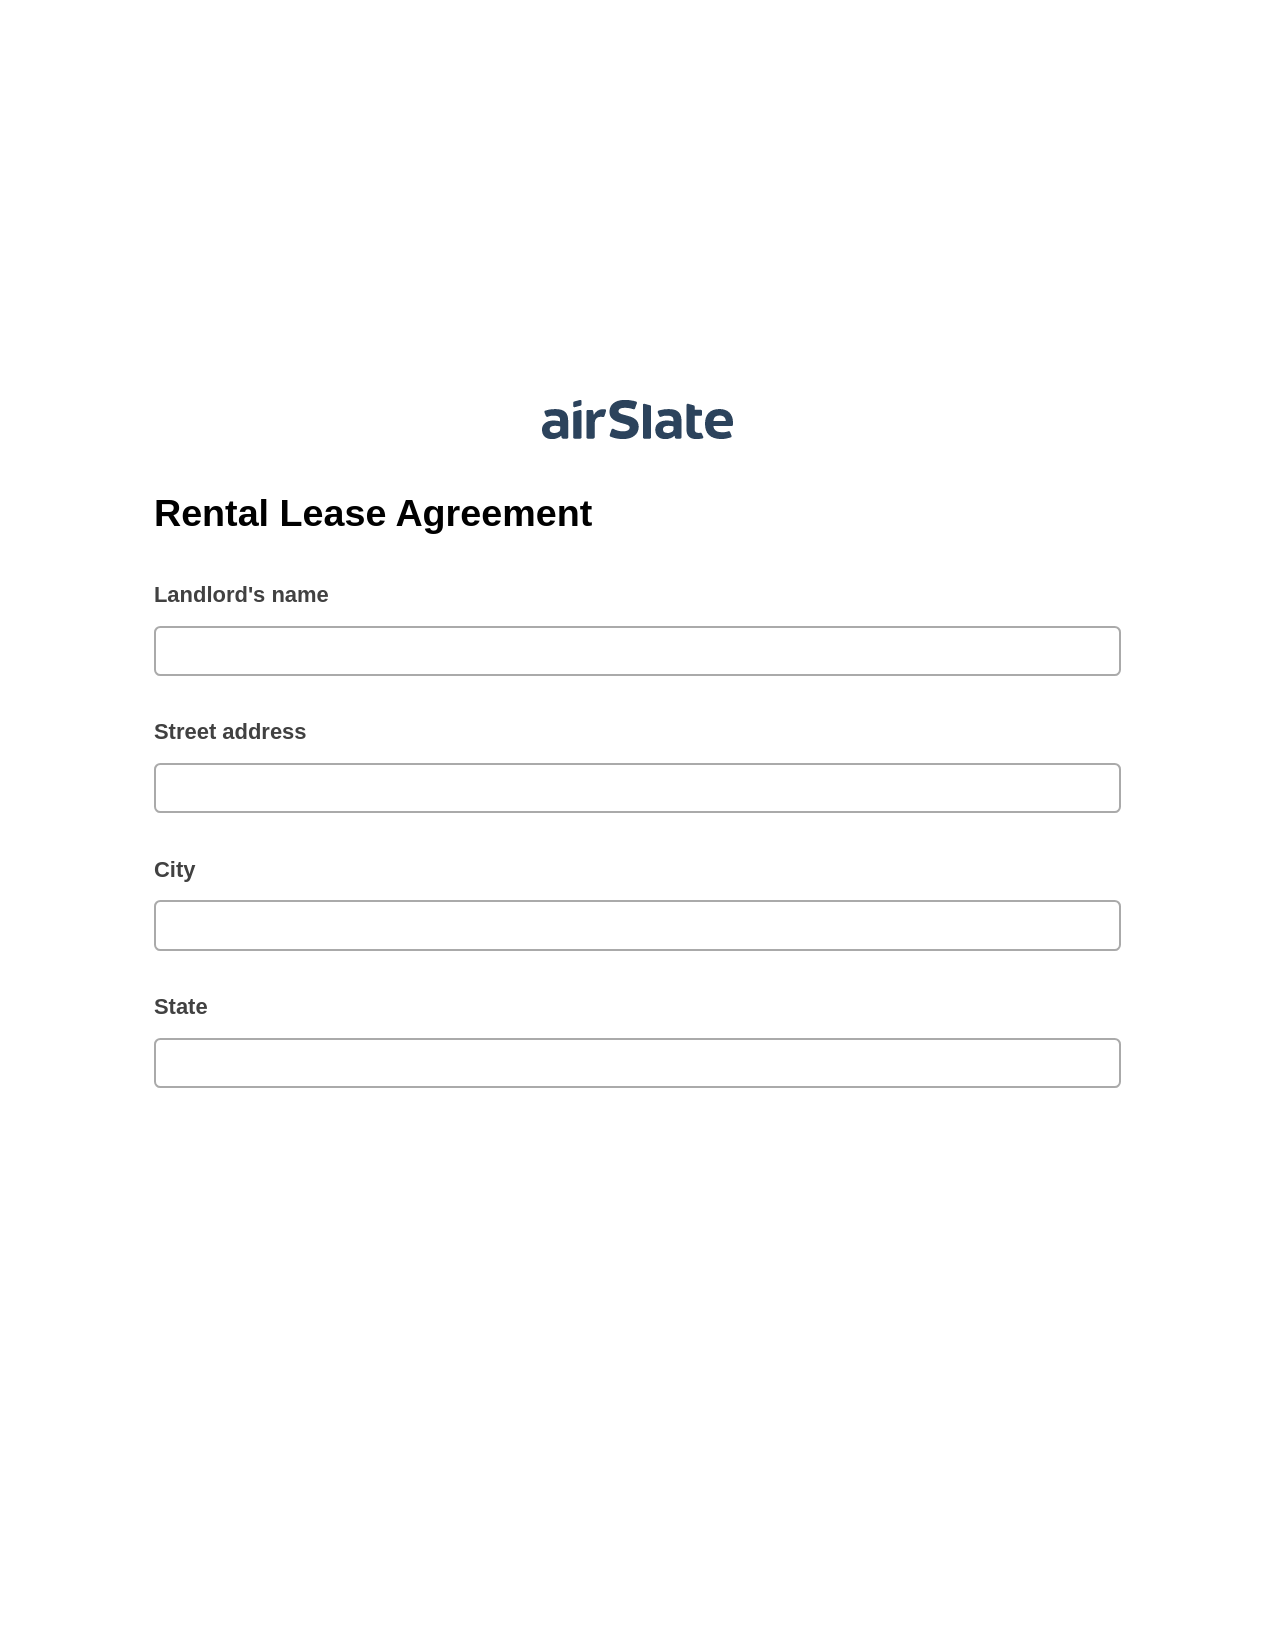 Rental Lease Agreement Pre-fill Slate from MS Dynamics 365 Records Bot, Open as Role Bot, Export to Google Sheet Bot